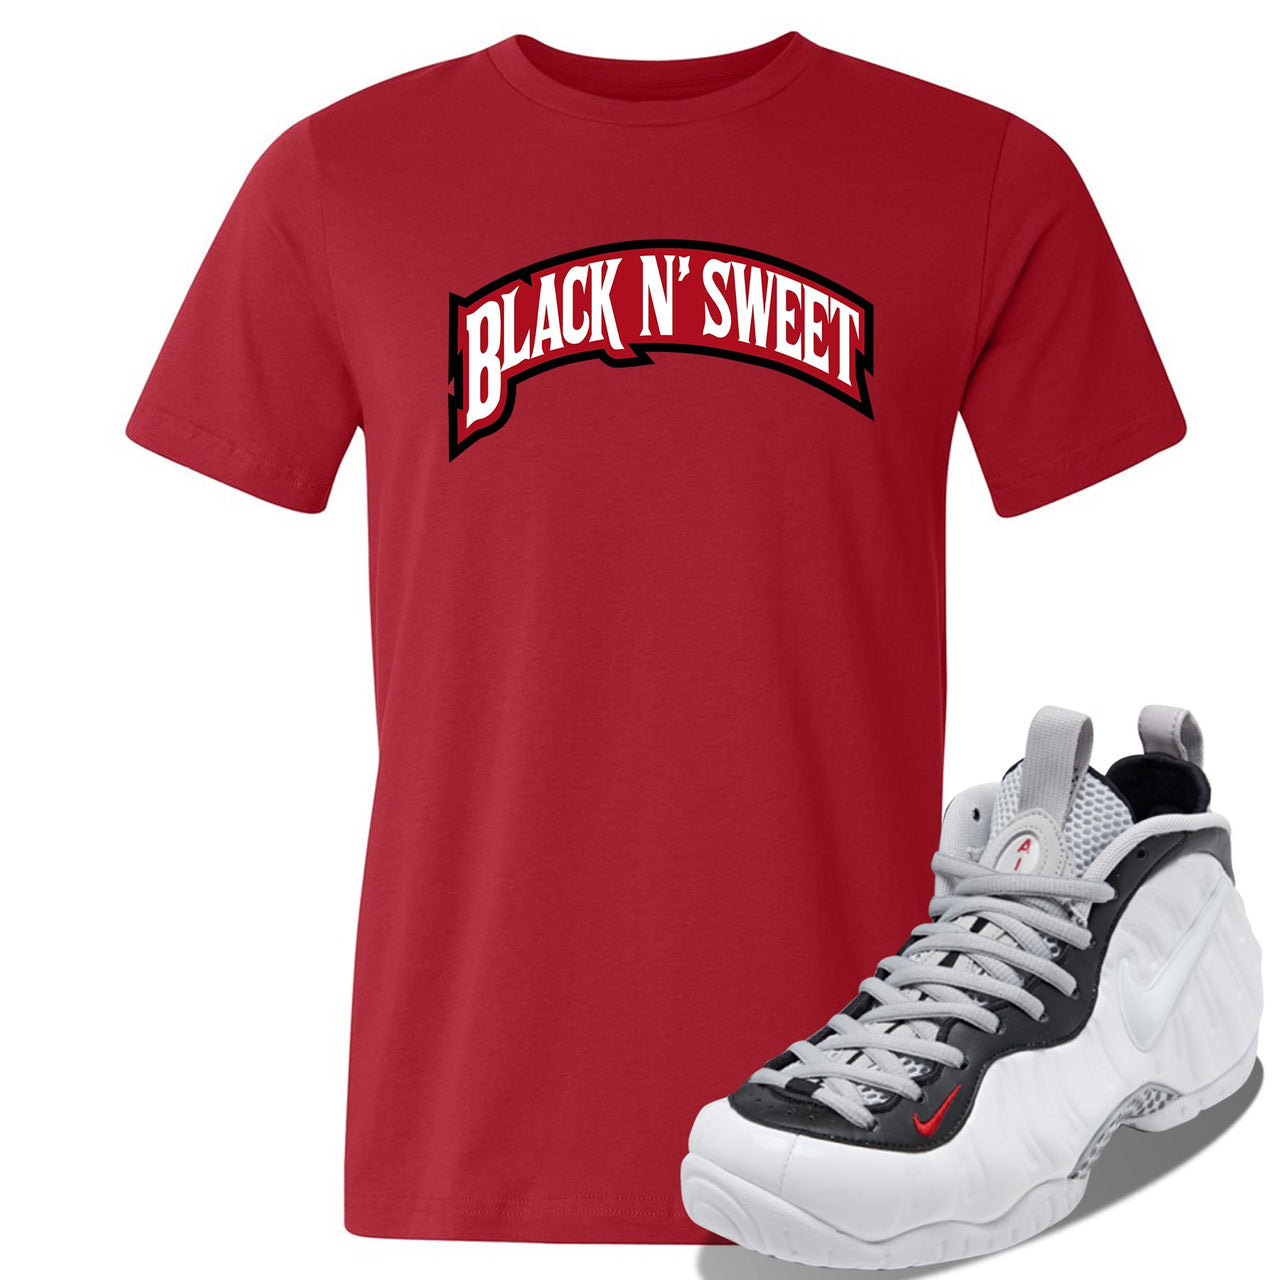 Foamposite Pro White Black University Red Sneaker Red T Shirt | Tees to match Nike Air Foamposite Pro White Black University Red Shoes | Black N Sweet Arch